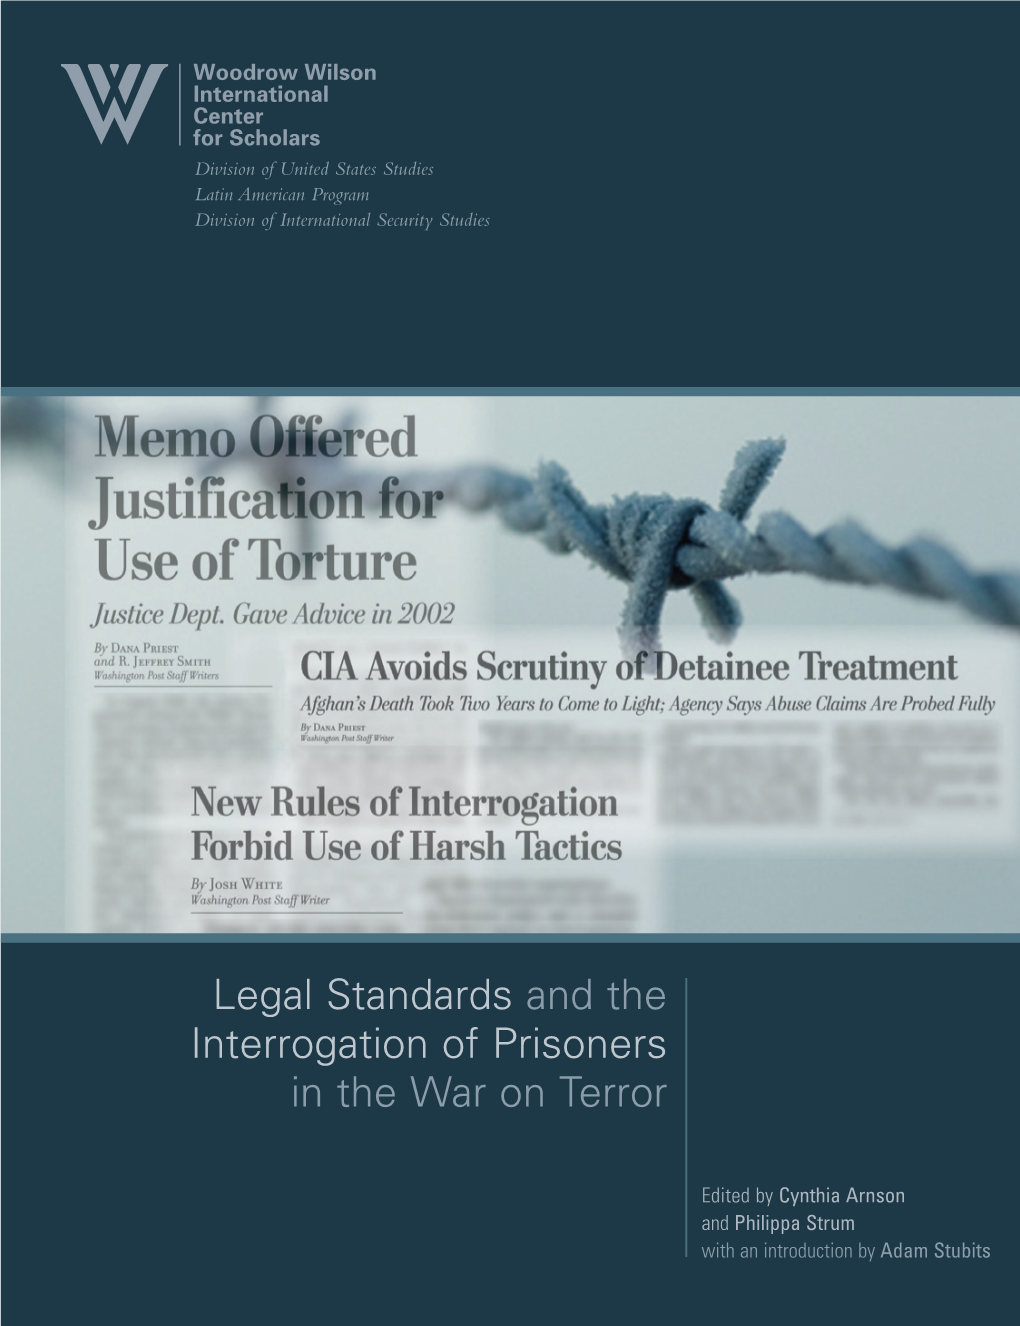 Legal Standards and the Interrogation of Prisoners in the War on Terror